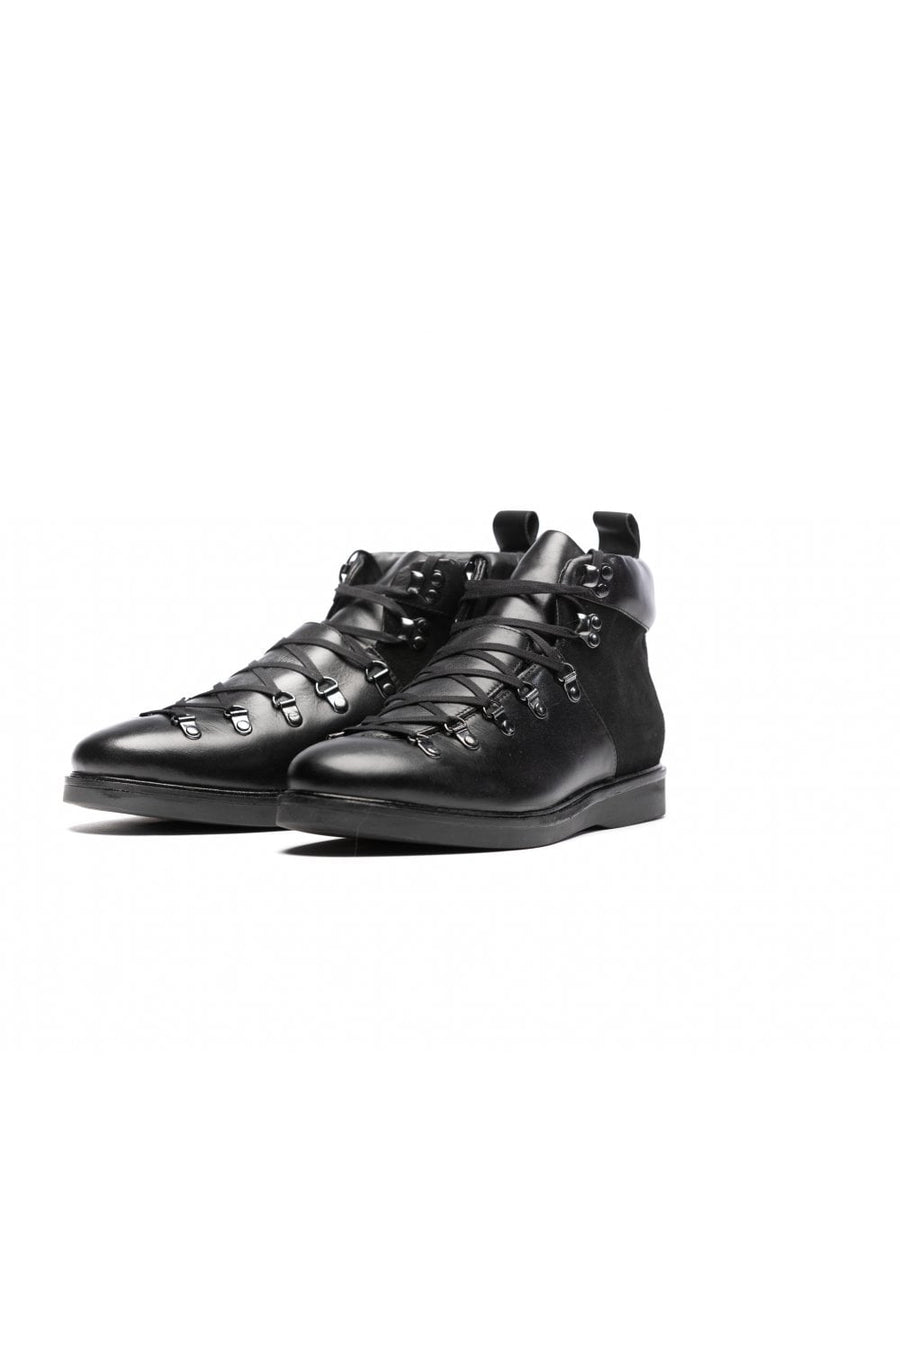 Buy the Hudson London Calverston Hiker Leather Boot Black at Intro. Spend £100 for free UK next day delivery. We ship worldwide.